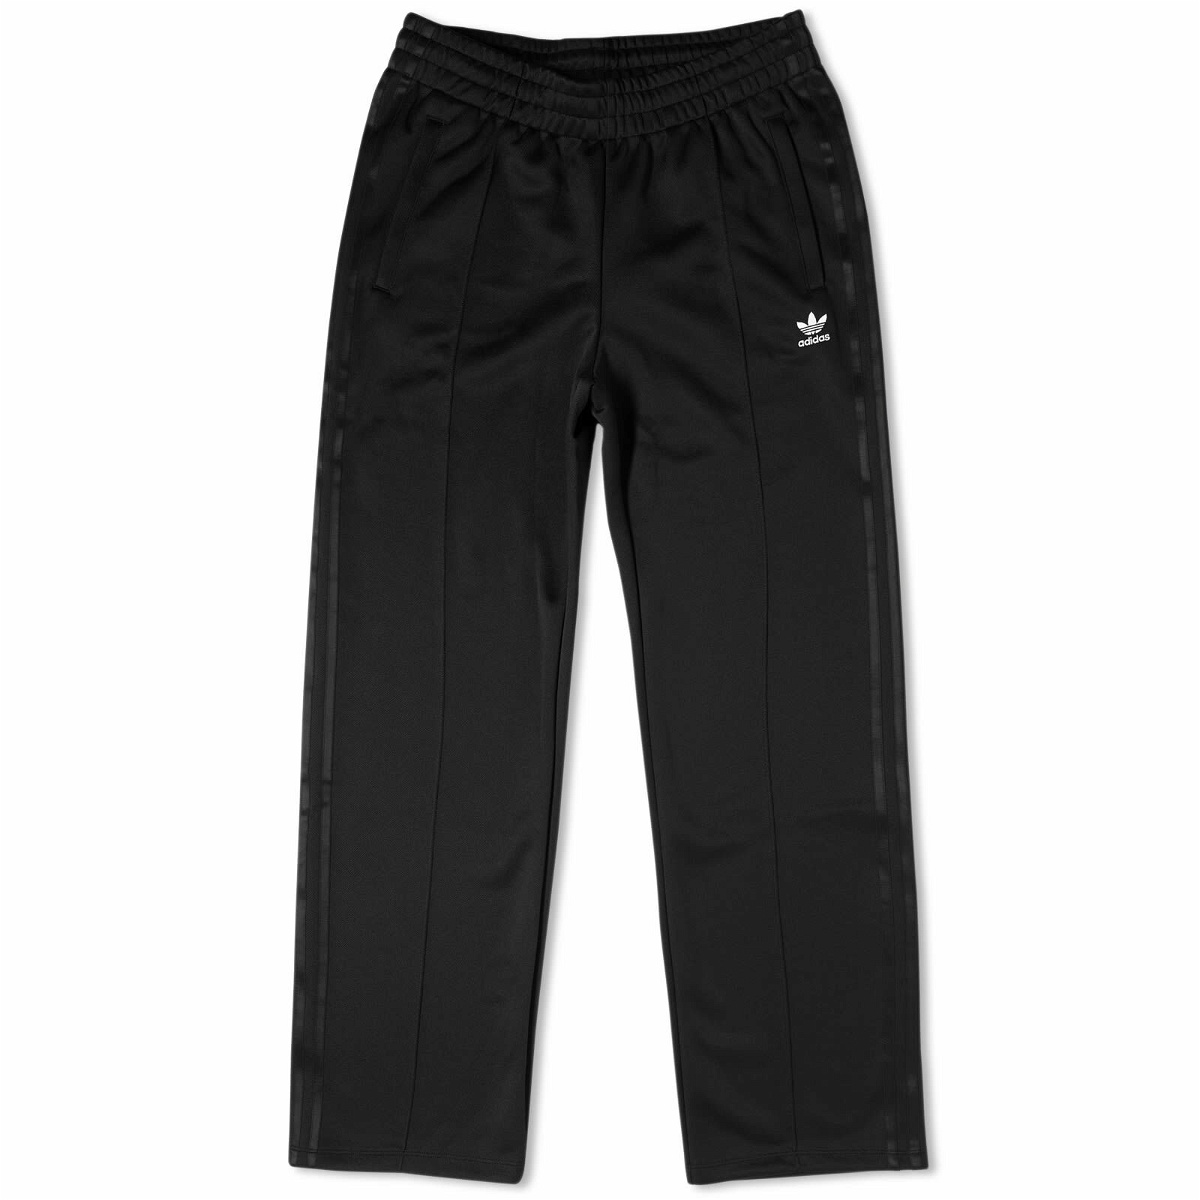 Adidas Women's Superstar Track Pant in Black adidas